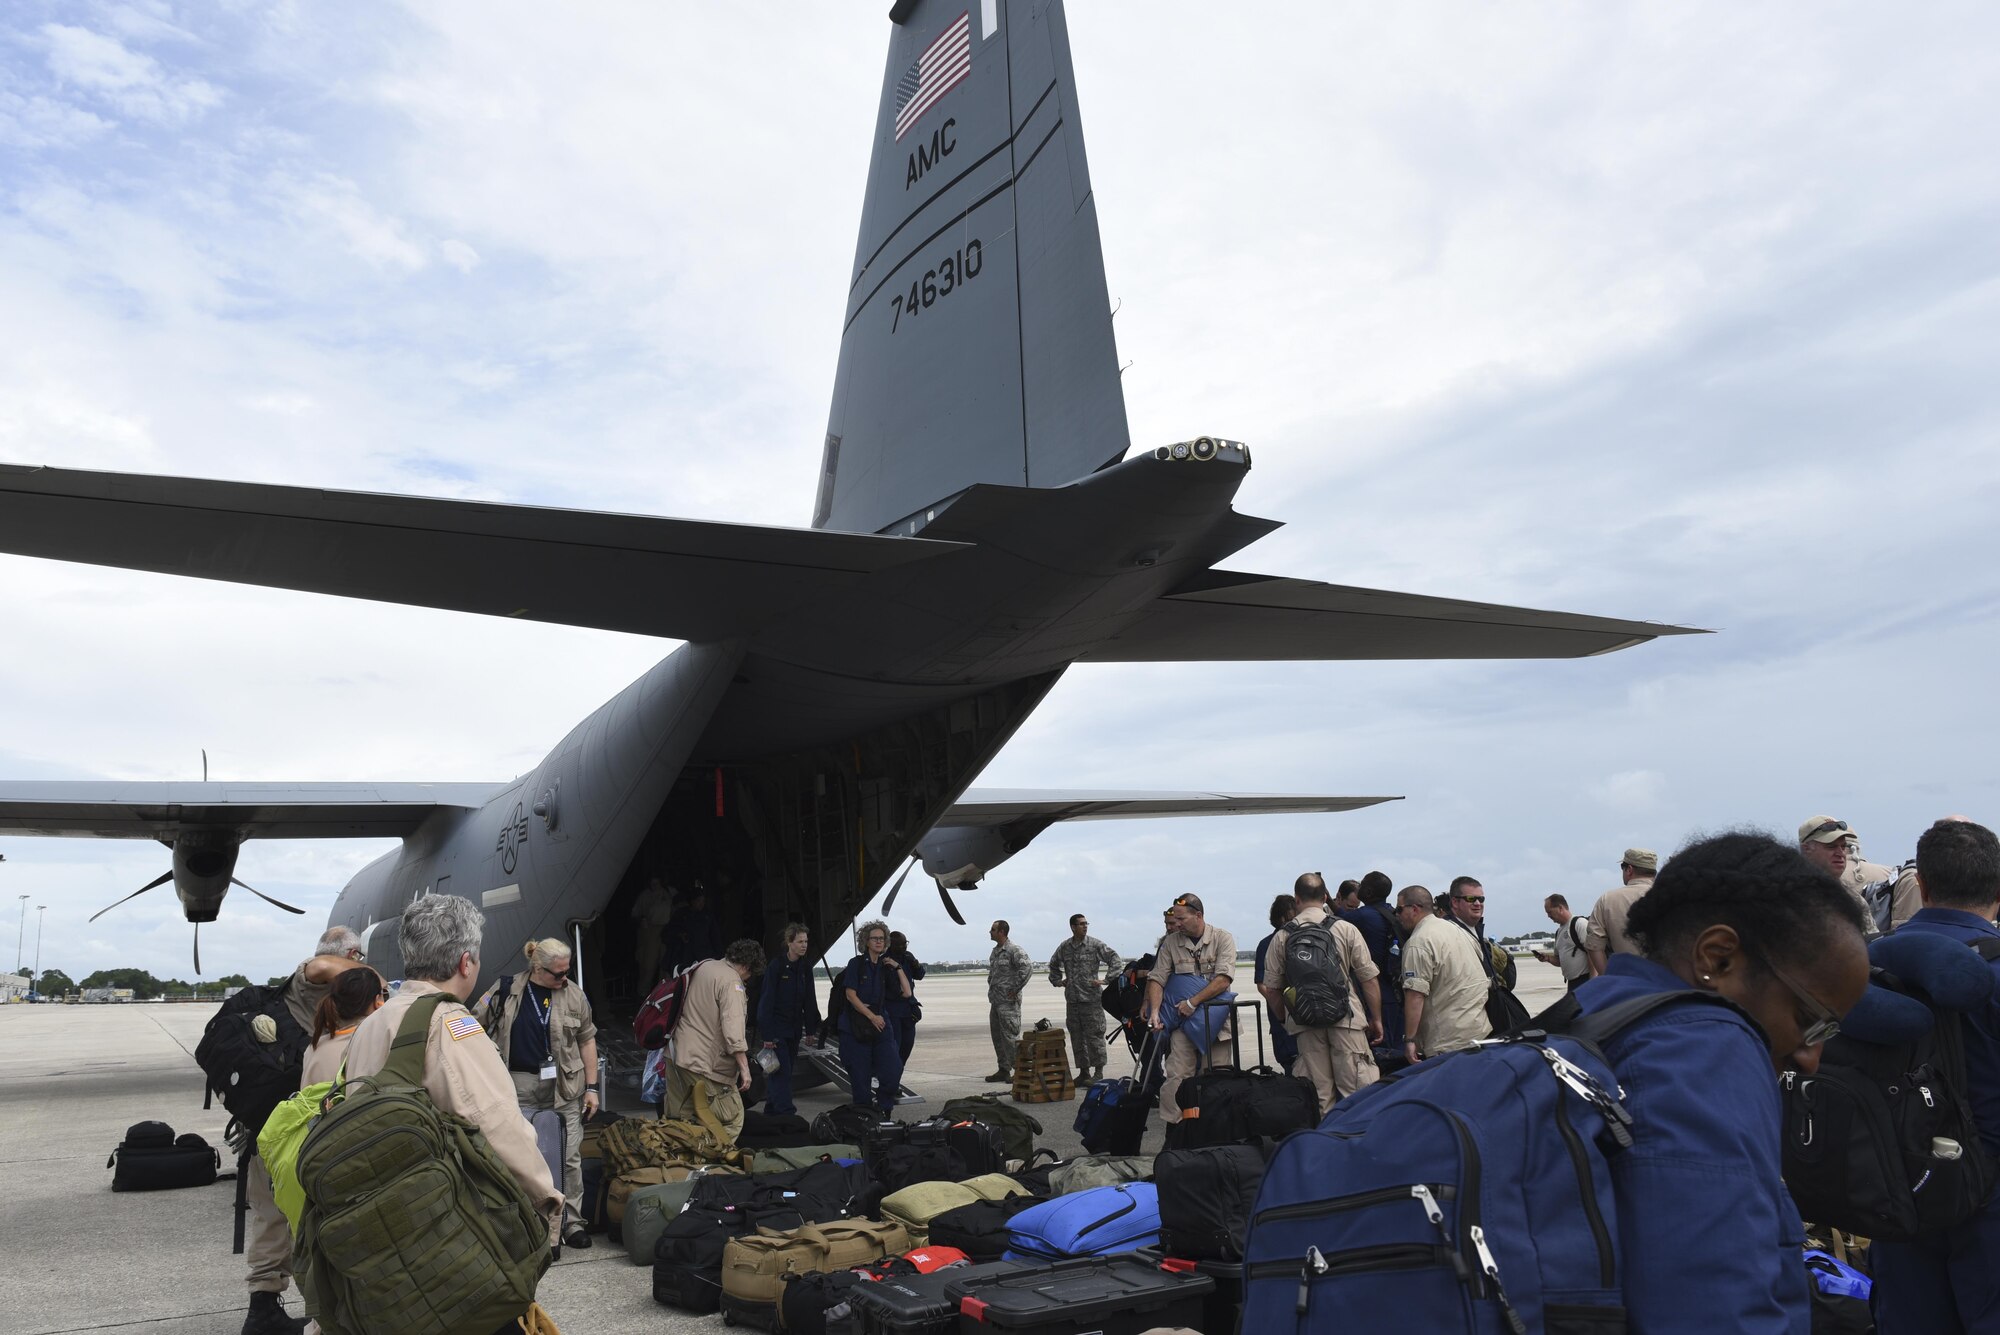 State Disaster Medical Assistance Teams and U.S. Public Health Rapid Deployment Force personnel gather their luggage and medical supplies after arriving in a C-130J assigned to the 41st Airlift Squadron, to Orlando, Fla., Sept. 9, 2017. The 41st Airlift Squadron, stationed at Little Rock Air Force Base, Ark., delivered medical response teams to Florida to prepare for relief efforts after Hurricane Irma. (U.S. Air Force photo by Senior Airman Mercedes Taylor)